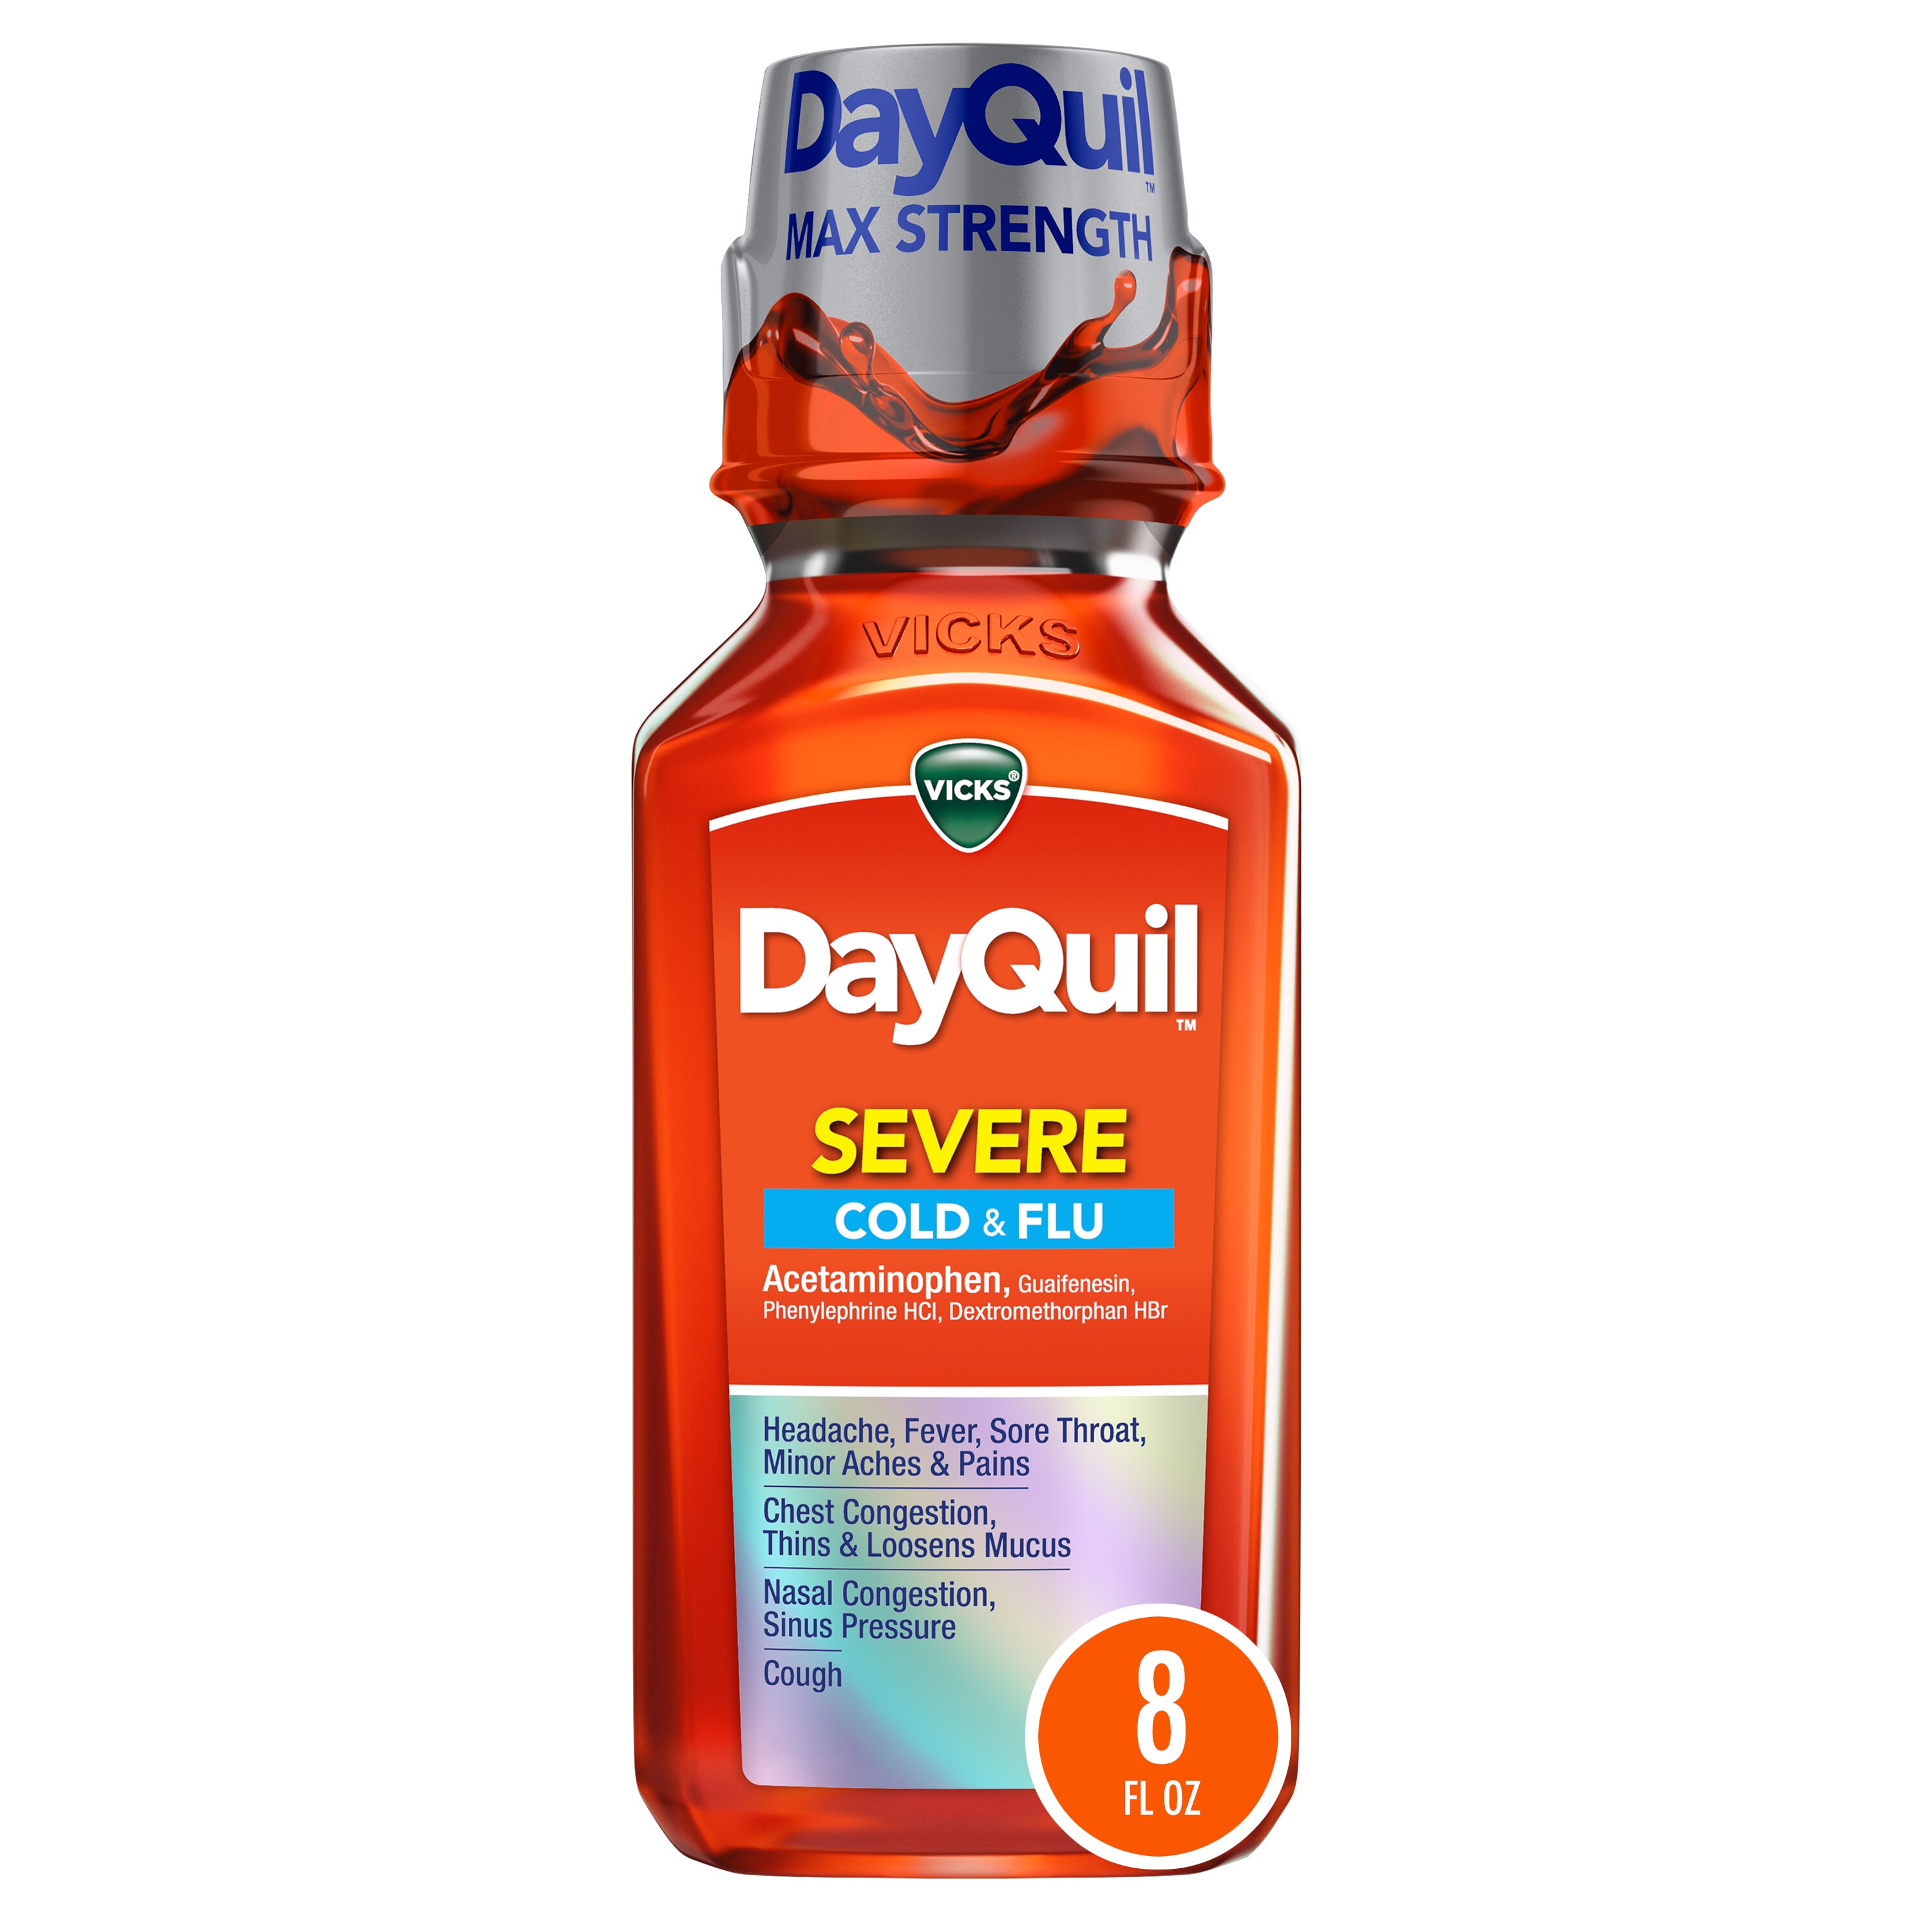 Vicks DayQuil SEVERE Cough, Cold & Flu Relief Liquid - Relieves Daytime Sore Throat, Fever, and Congestion